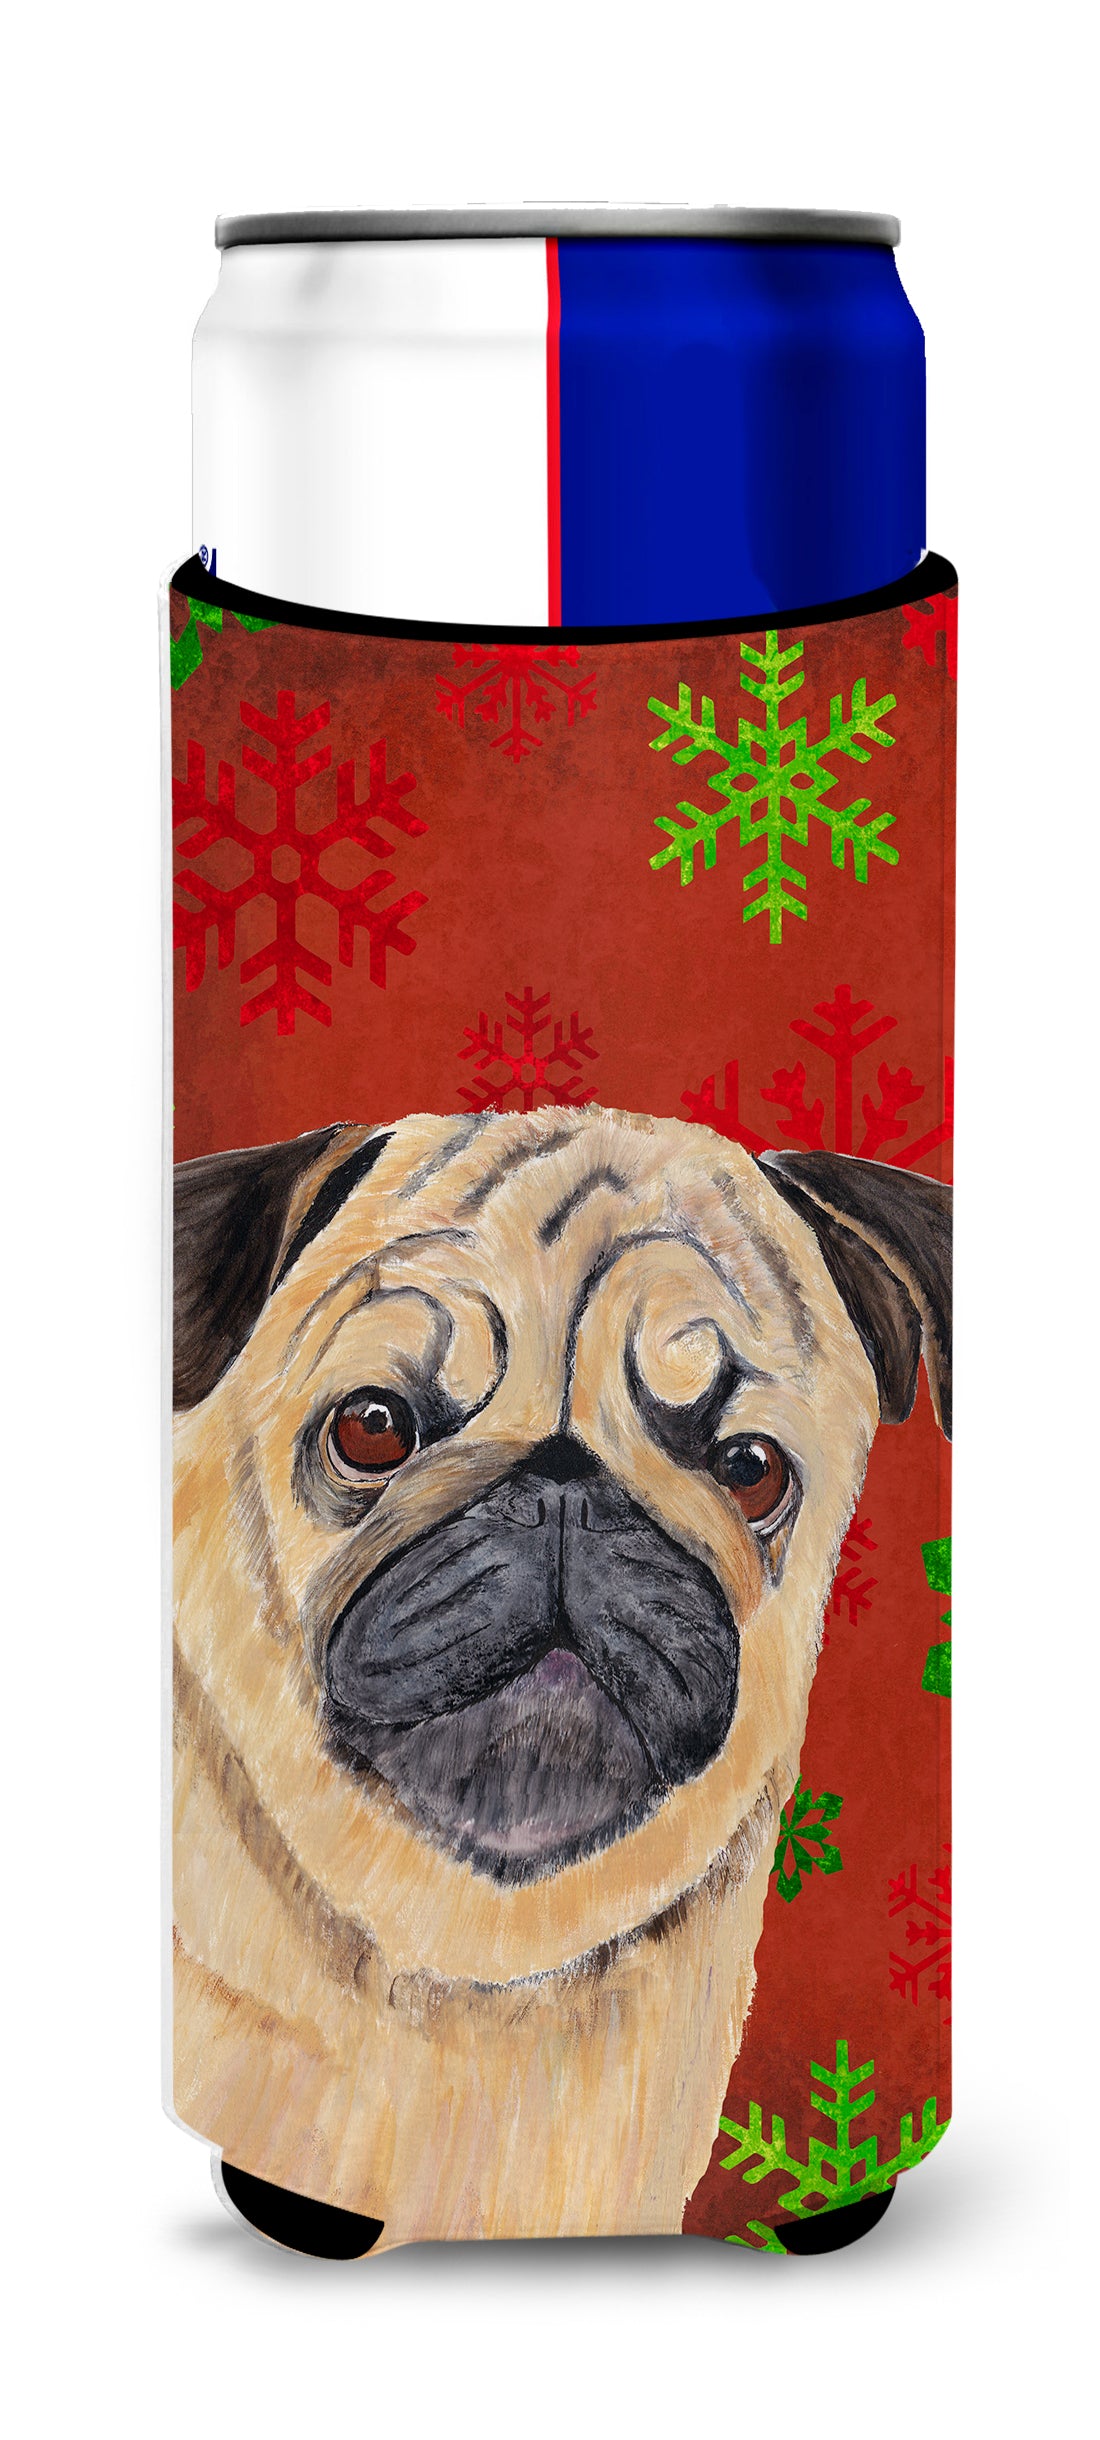 Pug Red and Green Snowflakes Holiday Christmas Ultra Beverage Insulators for slim cans SC9411MUK.